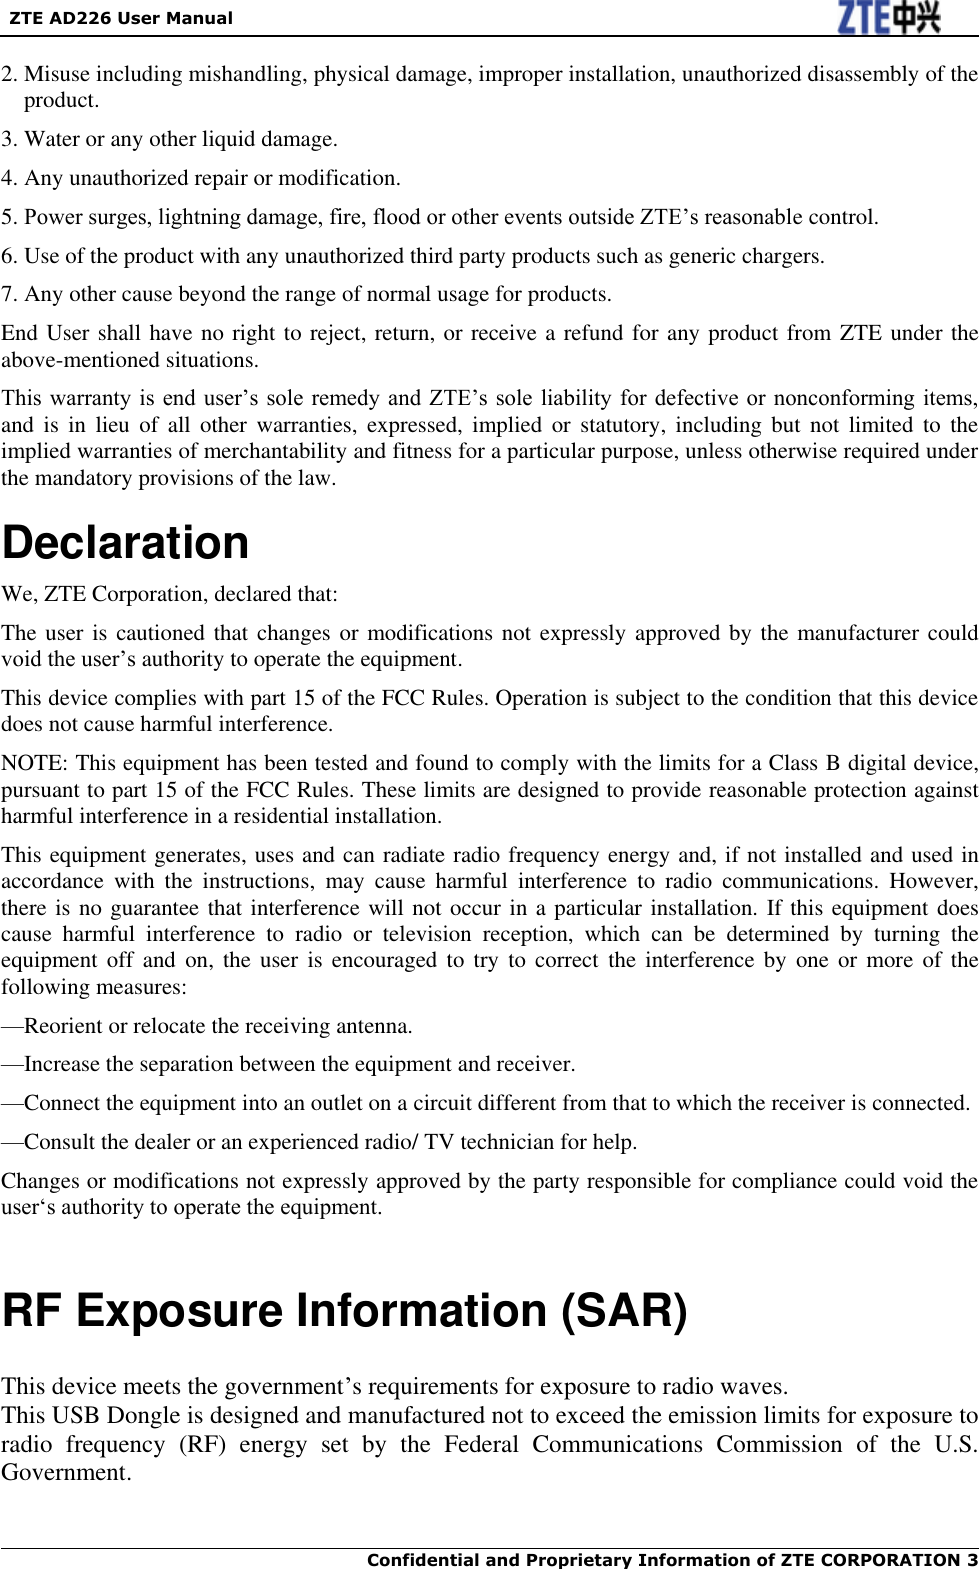   ZTE AD226 User Manual  Confidential and Proprietary Information of ZTE CORPORATION 3    2. Misuse including mishandling, physical damage, improper installation, unauthorized disassembly of the product. 3. Water or any other liquid damage. 4. Any unauthorized repair or modification. 5. Power surges, lightning damage, fire, flood or other events outside ZTE‟s reasonable control. 6. Use of the product with any unauthorized third party products such as generic chargers. 7. Any other cause beyond the range of normal usage for products. End User shall have no right to reject, return, or receive a refund for any product from ZTE under the above-mentioned situations. This warranty is end user‟s  sole  remedy  and ZTE‟s sole liability for  defective or nonconforming items, and  is  in lieu  of  all  other  warranties,  expressed, implied  or  statutory,  including  but  not limited  to  the implied warranties of merchantability and fitness for a particular purpose, unless otherwise required under the mandatory provisions of the law. Declaration We, ZTE Corporation, declared that: The user is cautioned that changes  or modifications  not expressly approved by the manufacturer could void the user‟s authority to operate the equipment. This device complies with part 15 of the FCC Rules. Operation is subject to the condition that this device does not cause harmful interference. NOTE: This equipment has been tested and found to comply with the limits for a Class B digital device, pursuant to part 15 of the FCC Rules. These limits are designed to provide reasonable protection against harmful interference in a residential installation.   This equipment generates, uses and can radiate radio frequency energy and, if not installed and used in accordance  with  the  instructions,  may  cause  harmful  interference  to  radio  communications.  However, there is no guarantee that interference will not occur in a particular installation. If this equipment does cause  harmful  interference  to  radio  or  television  reception,  which  can  be  determined  by  turning  the equipment  off  and  on,  the  user  is  encouraged  to  try  to  correct  the  interference  by  one  or  more  of  the following measures: —Reorient or relocate the receiving antenna. —Increase the separation between the equipment and receiver. —Connect the equipment into an outlet on a circuit different from that to which the receiver is connected. —Consult the dealer or an experienced radio/ TV technician for help. Changes or modifications not expressly approved by the party responsible for compliance could void the user„s authority to operate the equipment.  RF Exposure Information (SAR)    This device meets the government‟s requirements for exposure to radio waves. This USB Dongle is designed and manufactured not to exceed the emission limits for exposure to radio  frequency  (RF)  energy  set  by  the  Federal  Communications  Commission  of  the  U.S. Government.      